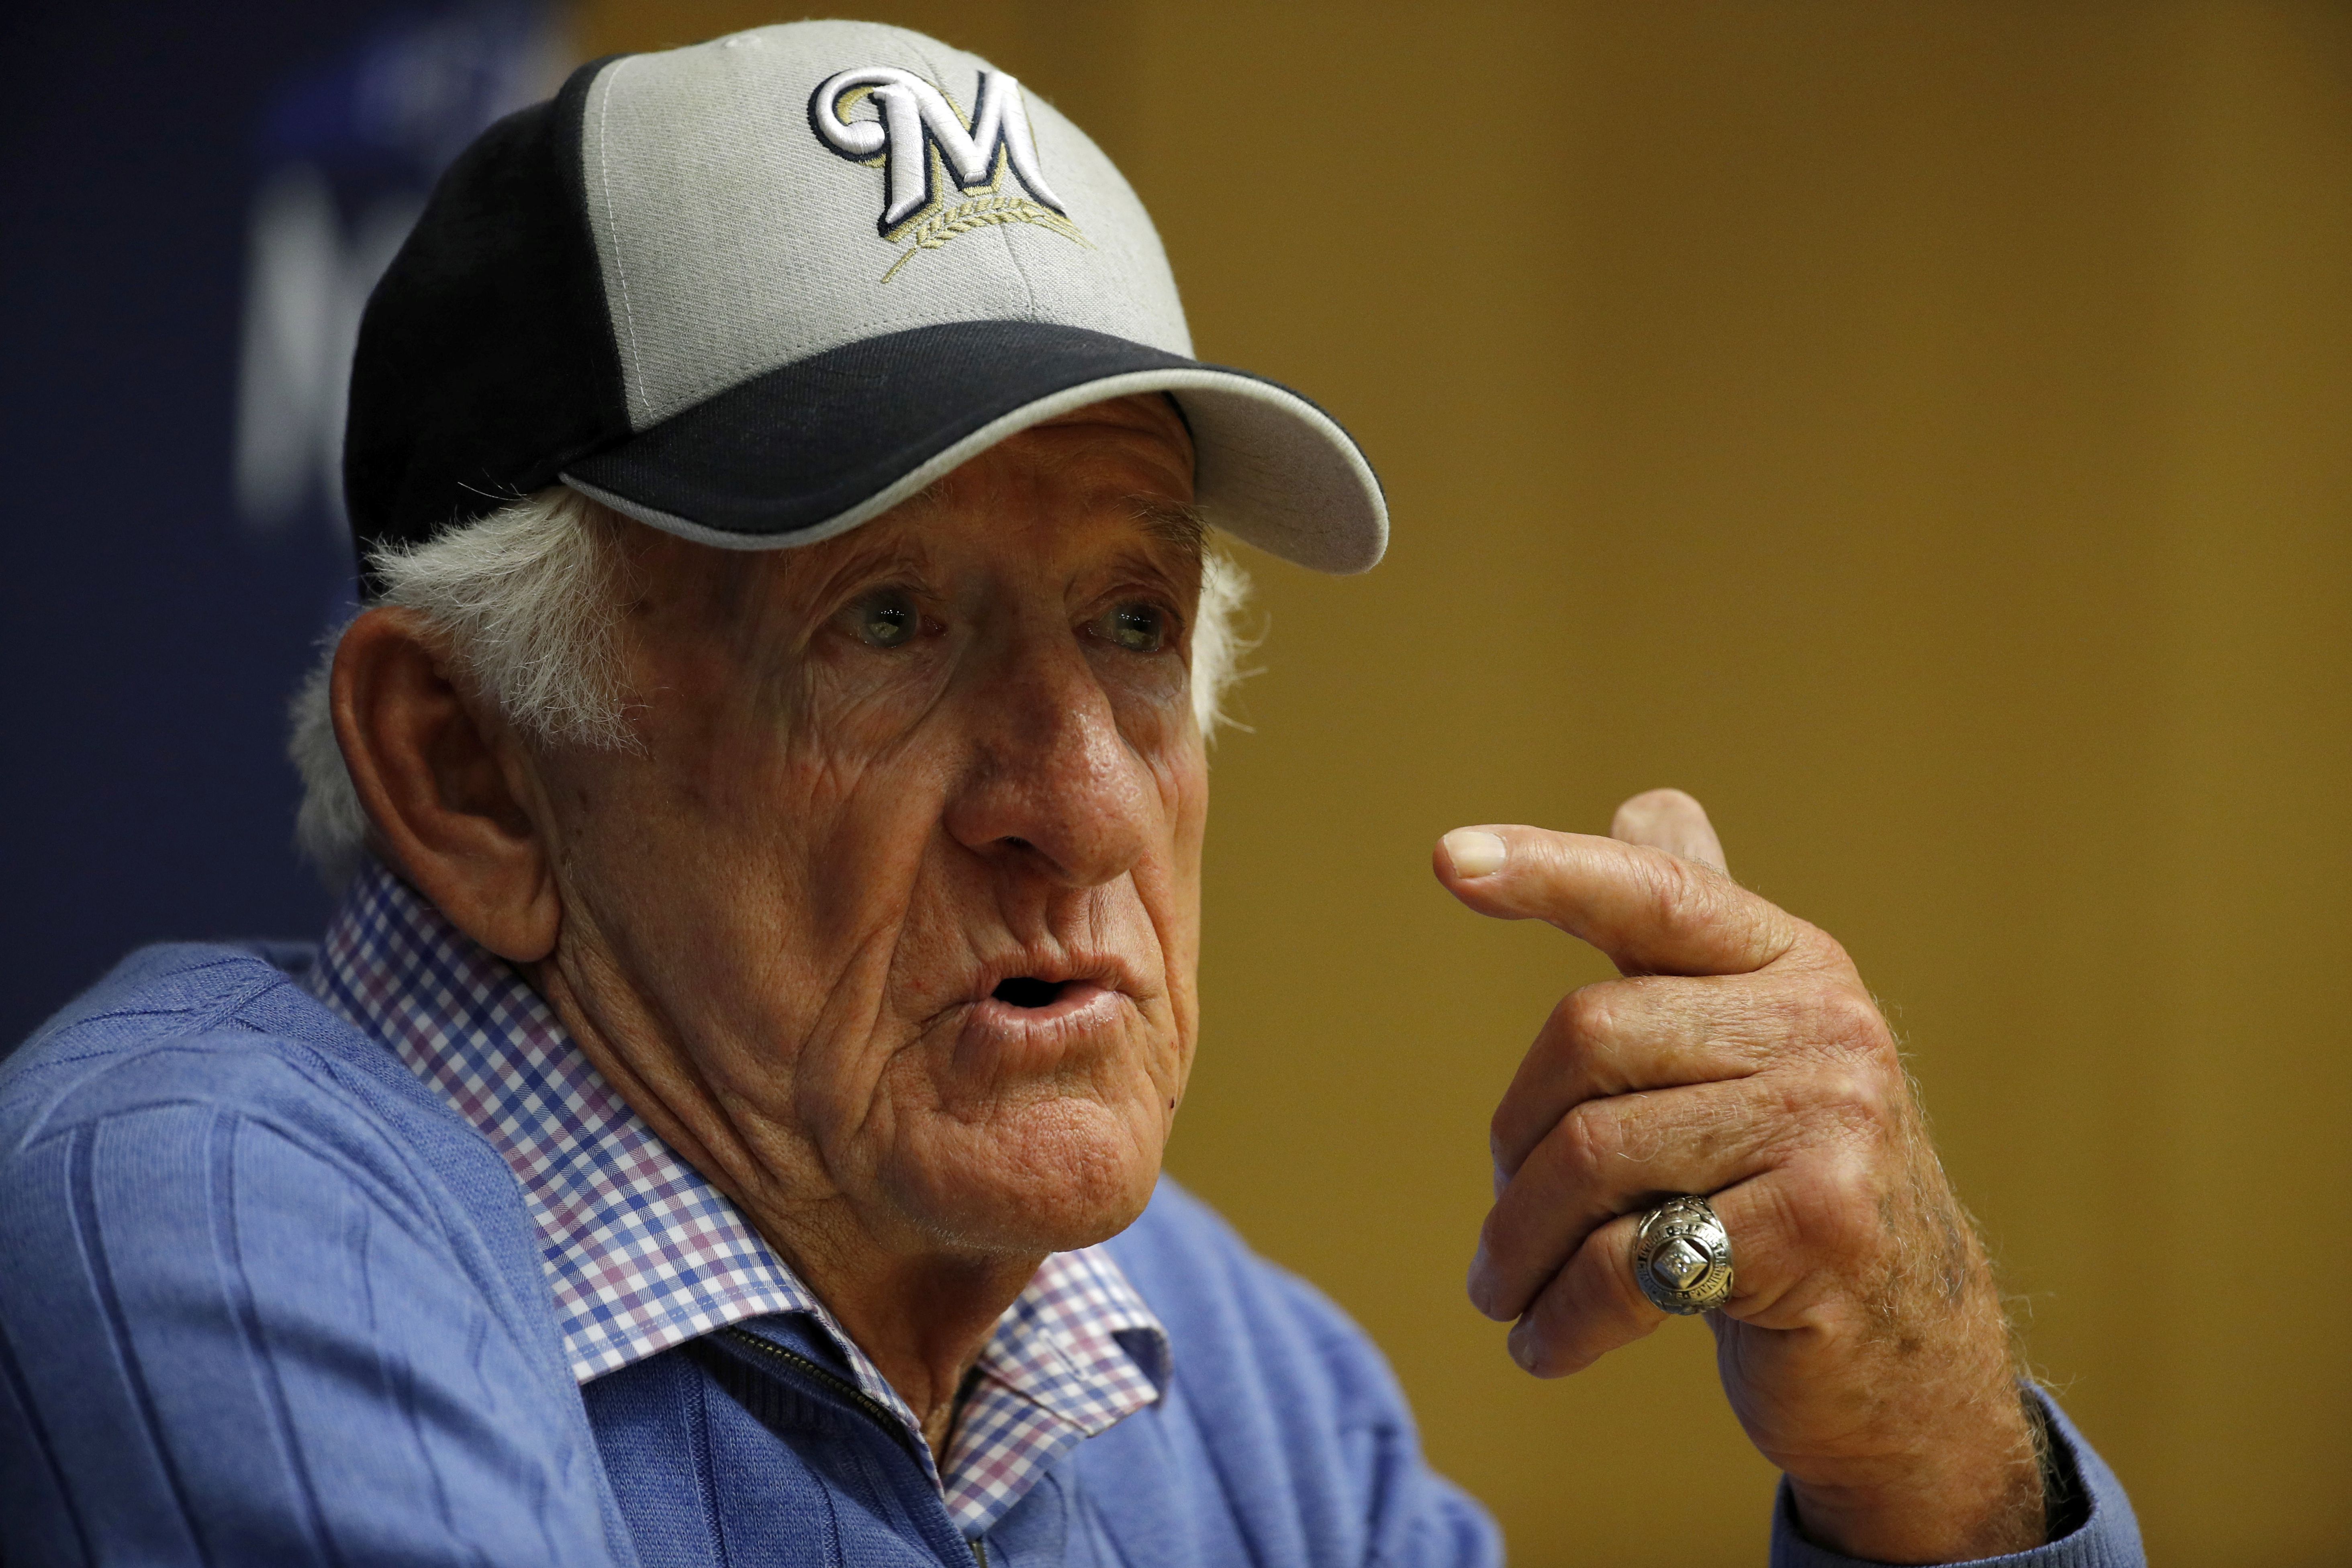 Bob Uecker, serviceable catcher, Hall of Fame broadcaster for the Brewers,  actor, comedian.